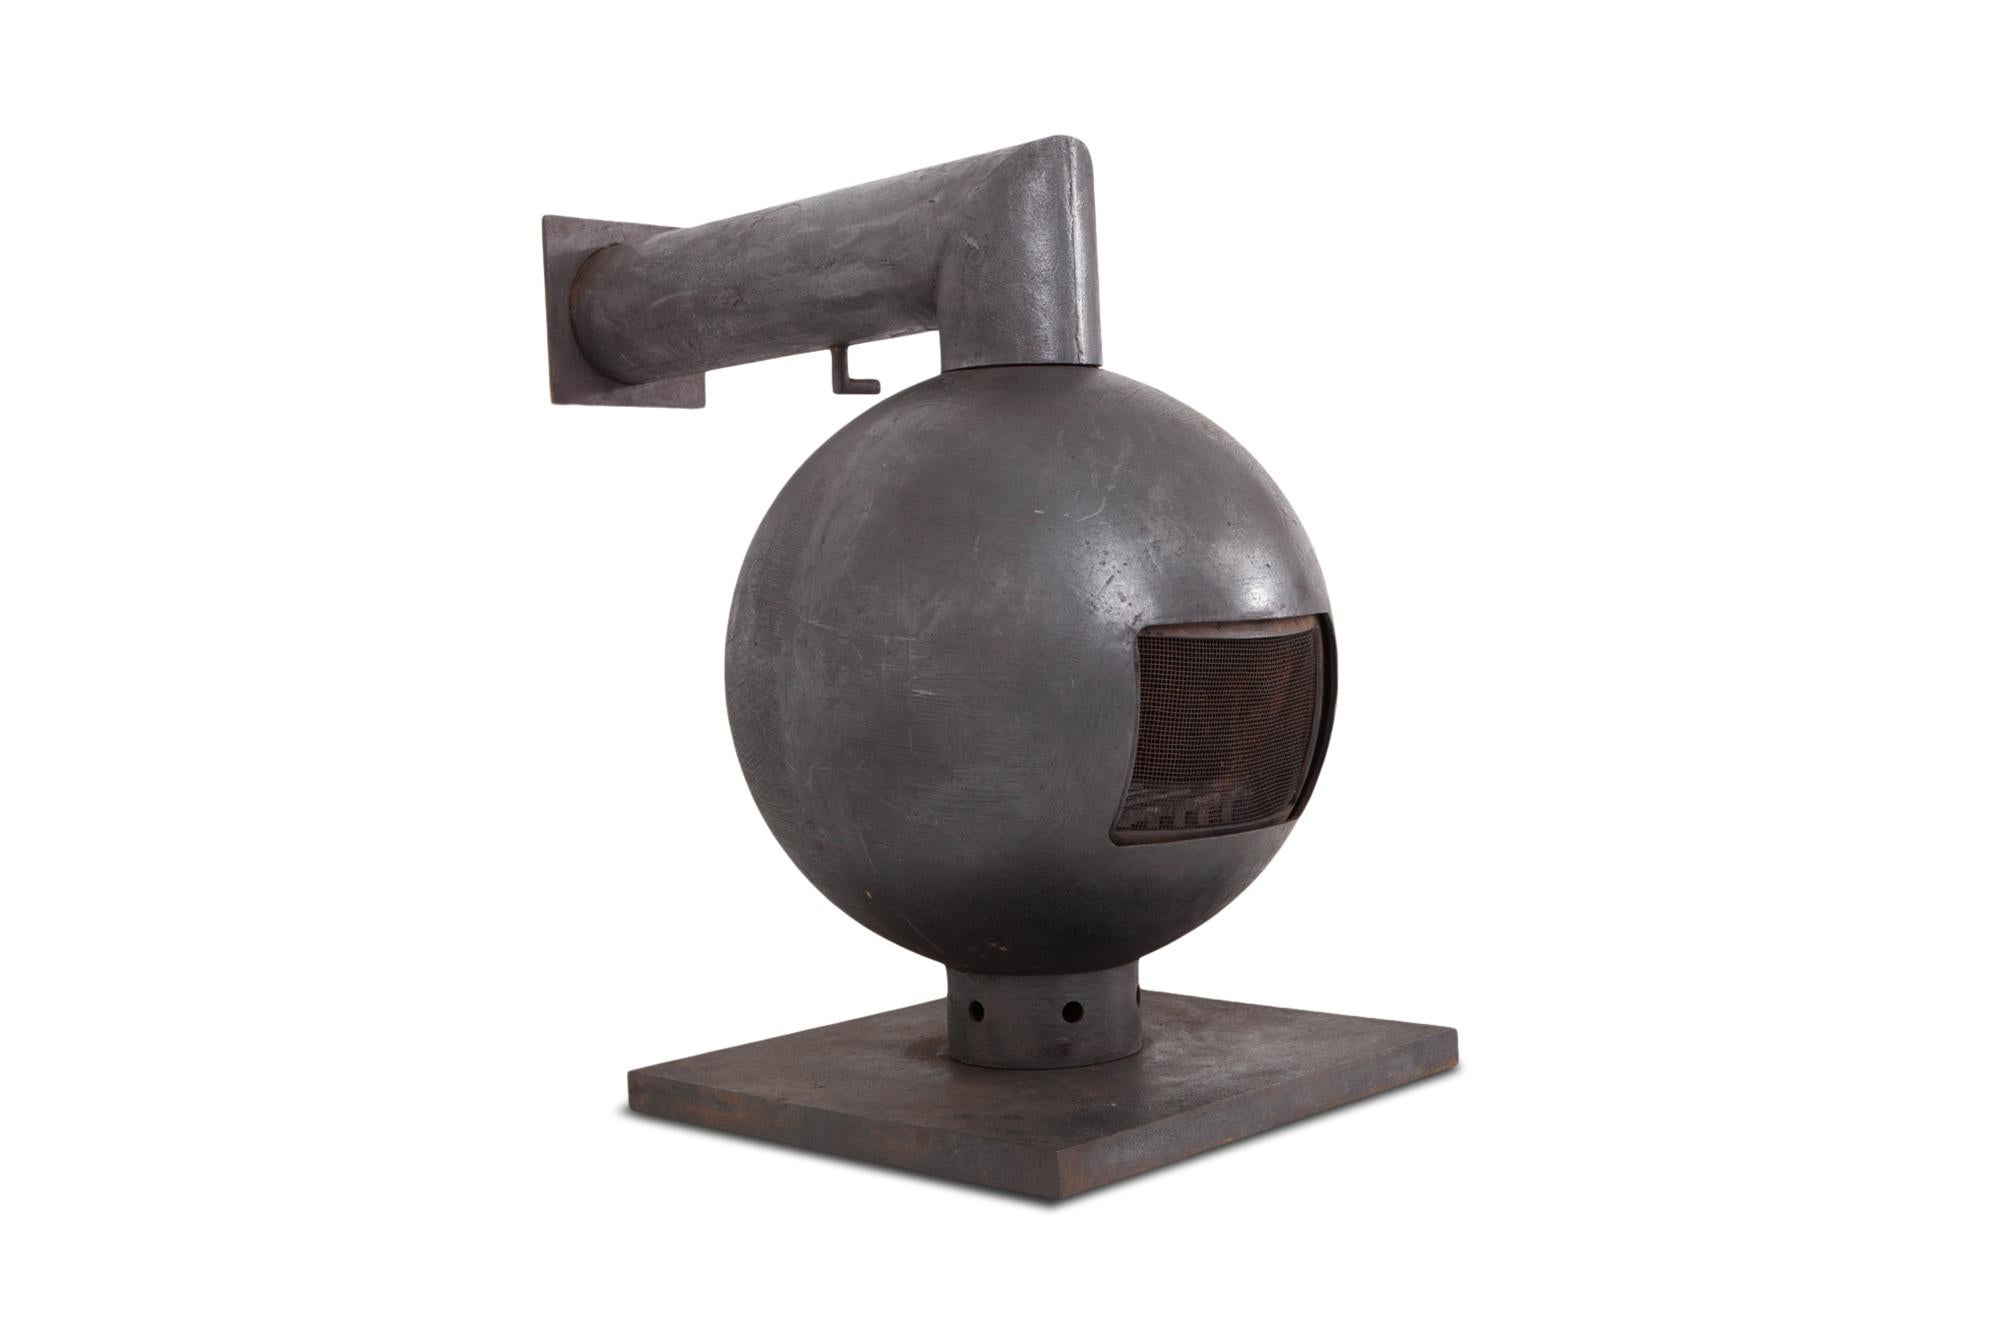 Midcentury spherical fireplace made out of heavy wrought iron by Dries Kreijkamp , the Netherlands, 1960s.

This Mid-Century Modern fireplace can rotate 360 and is provided with a sliding door making sure
no coals or wood can fall out.